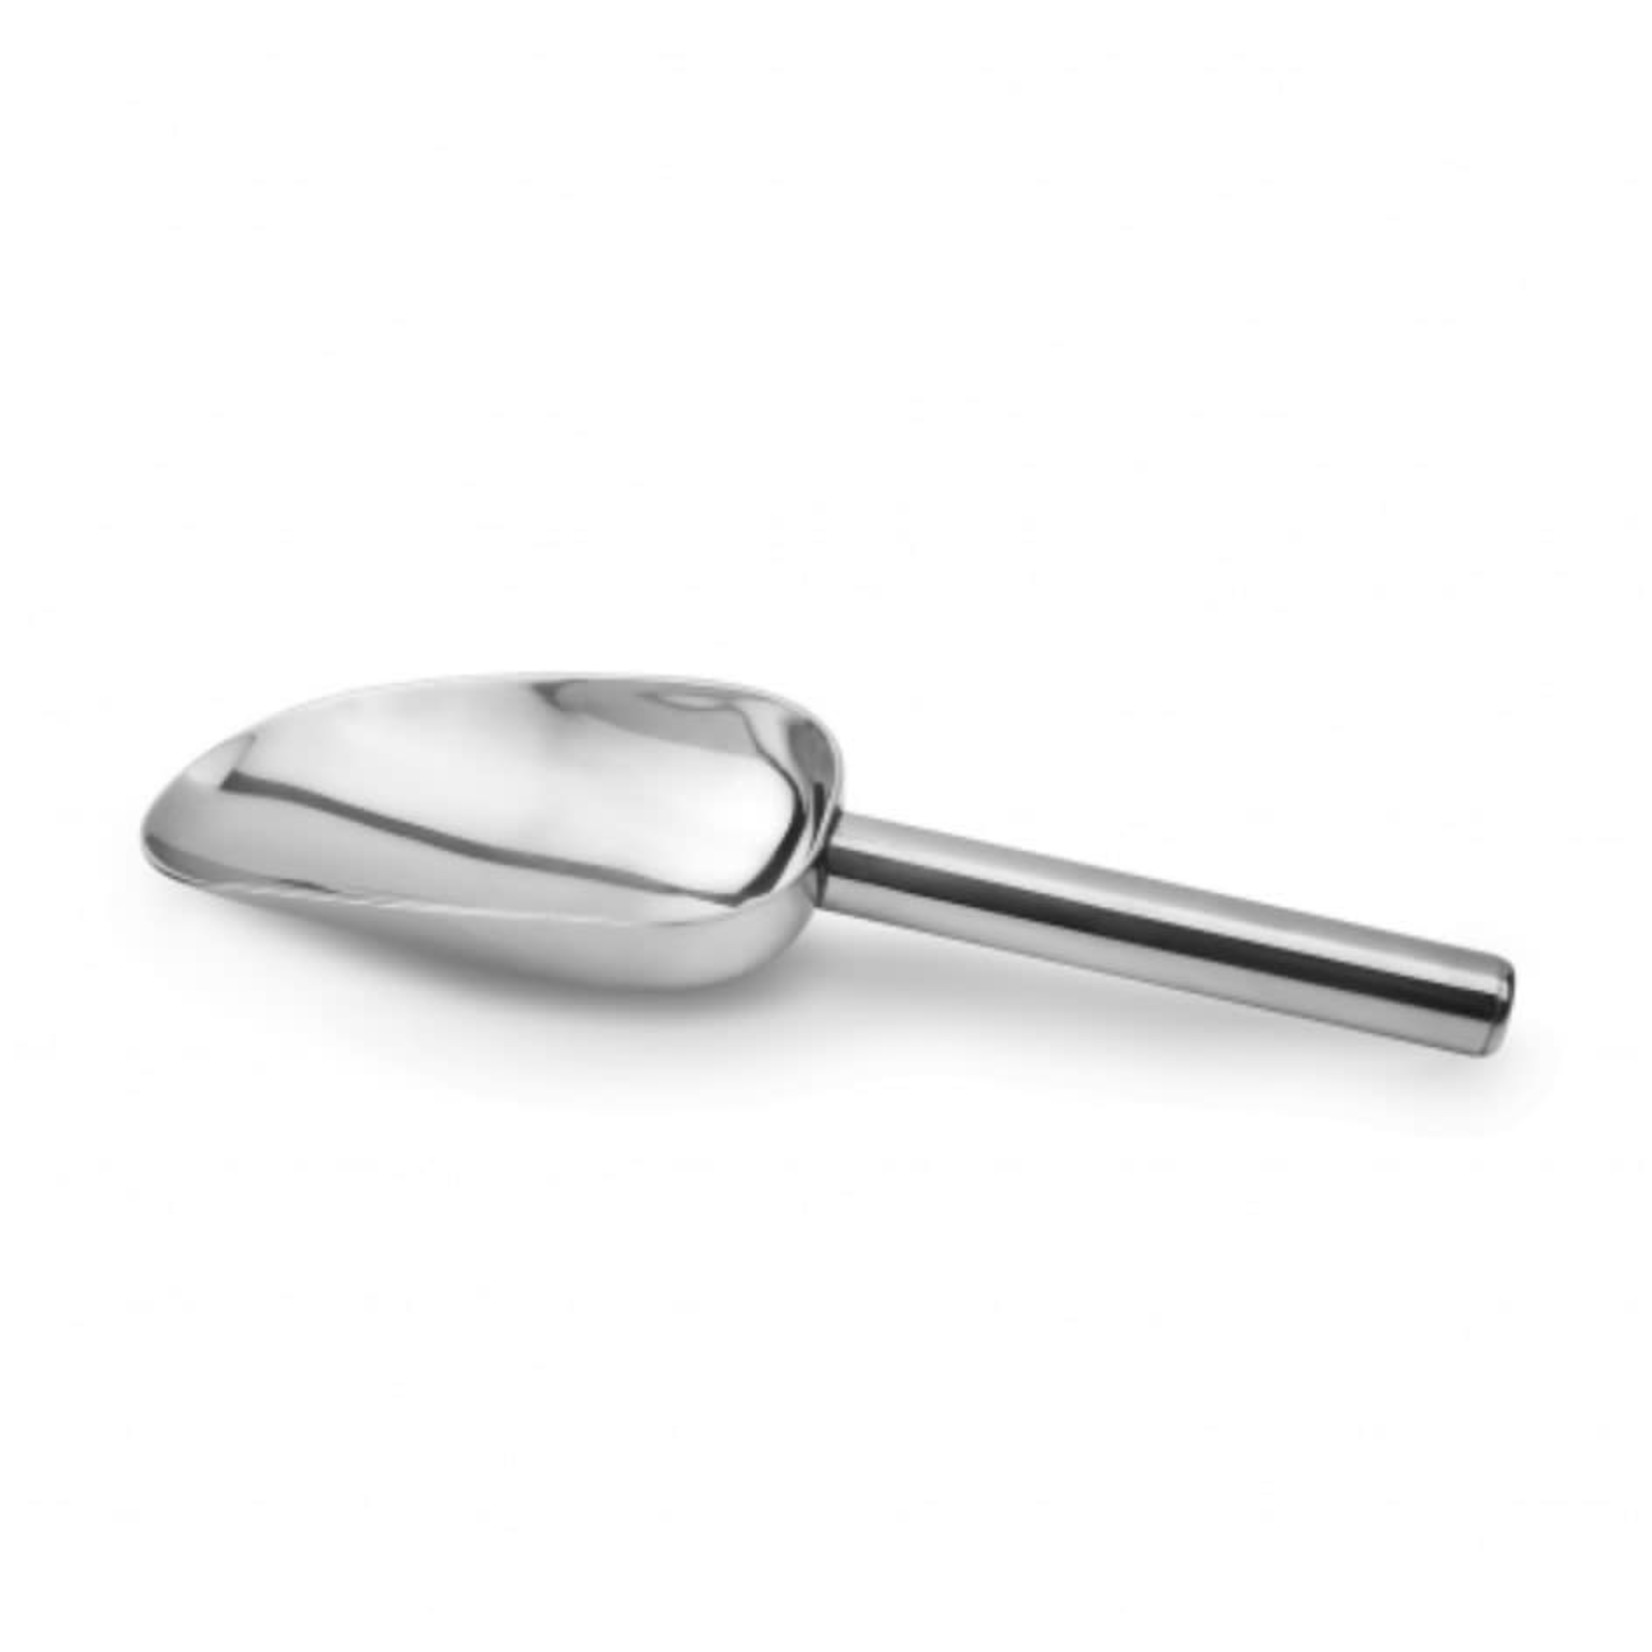 FINAL TOUCH FINAL TOUCH Ice Scoop - Stainless